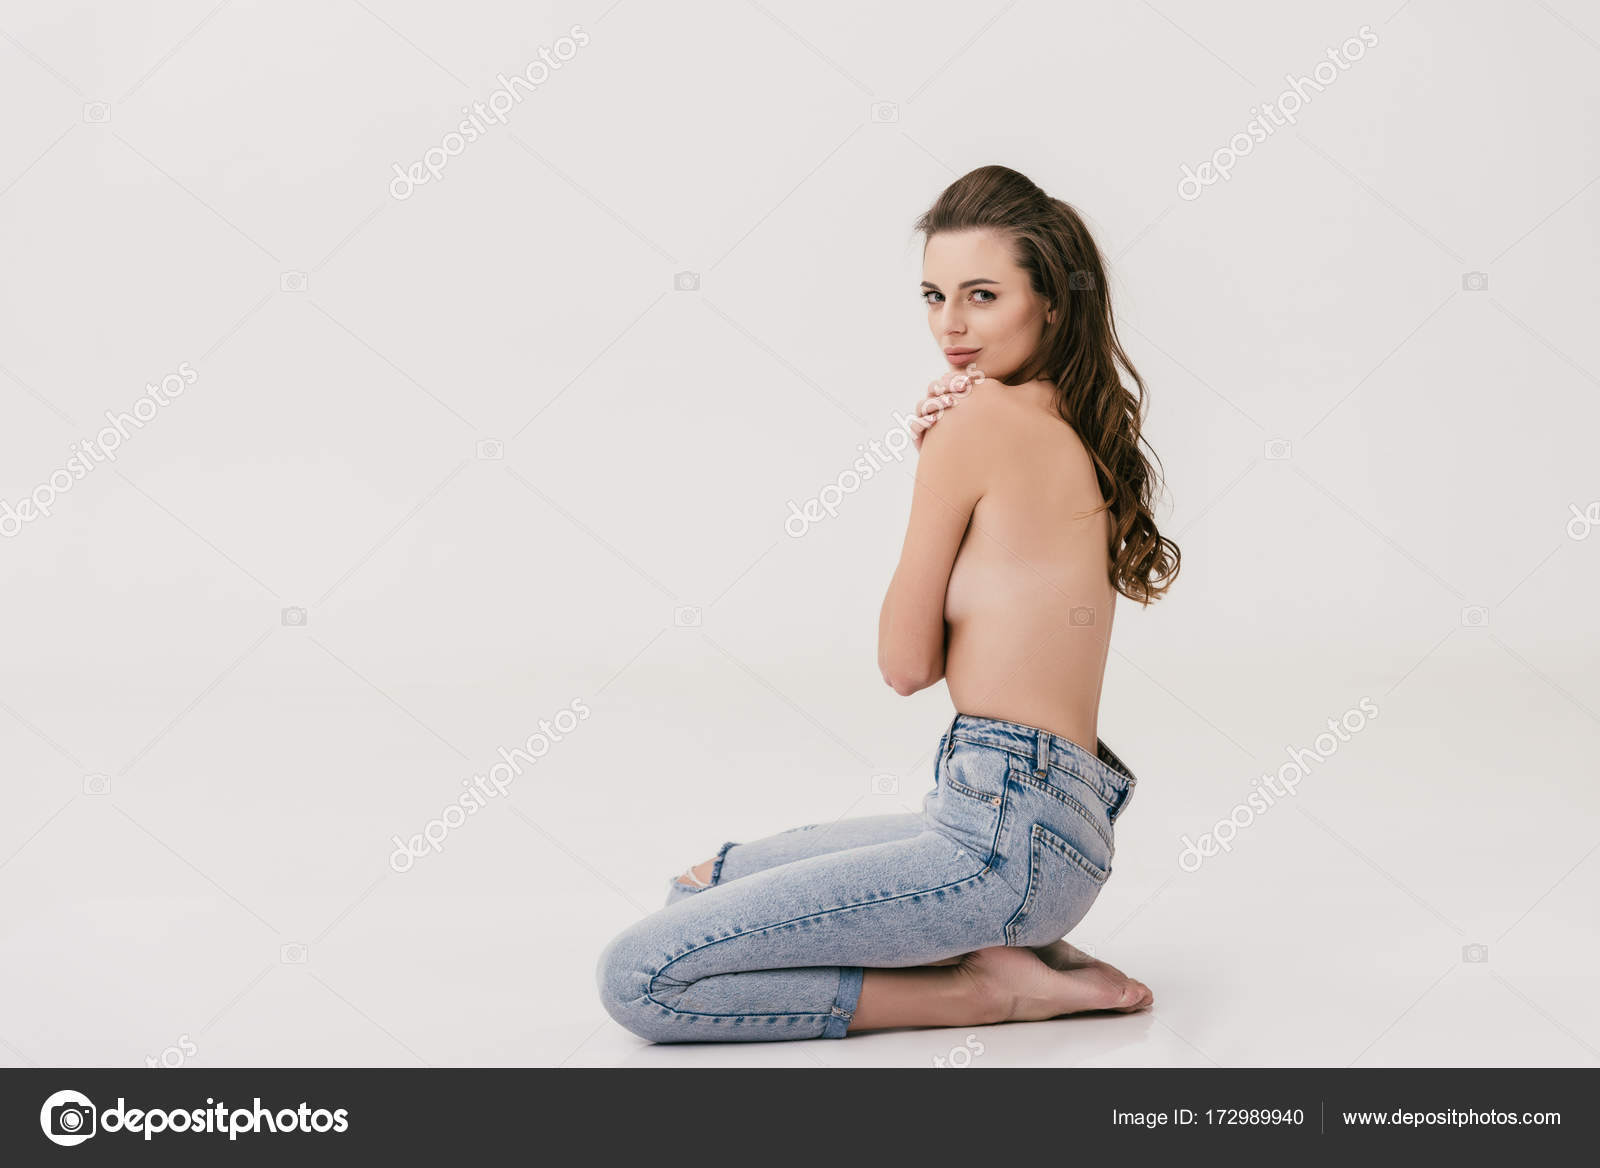 Topless Girl In Jeans